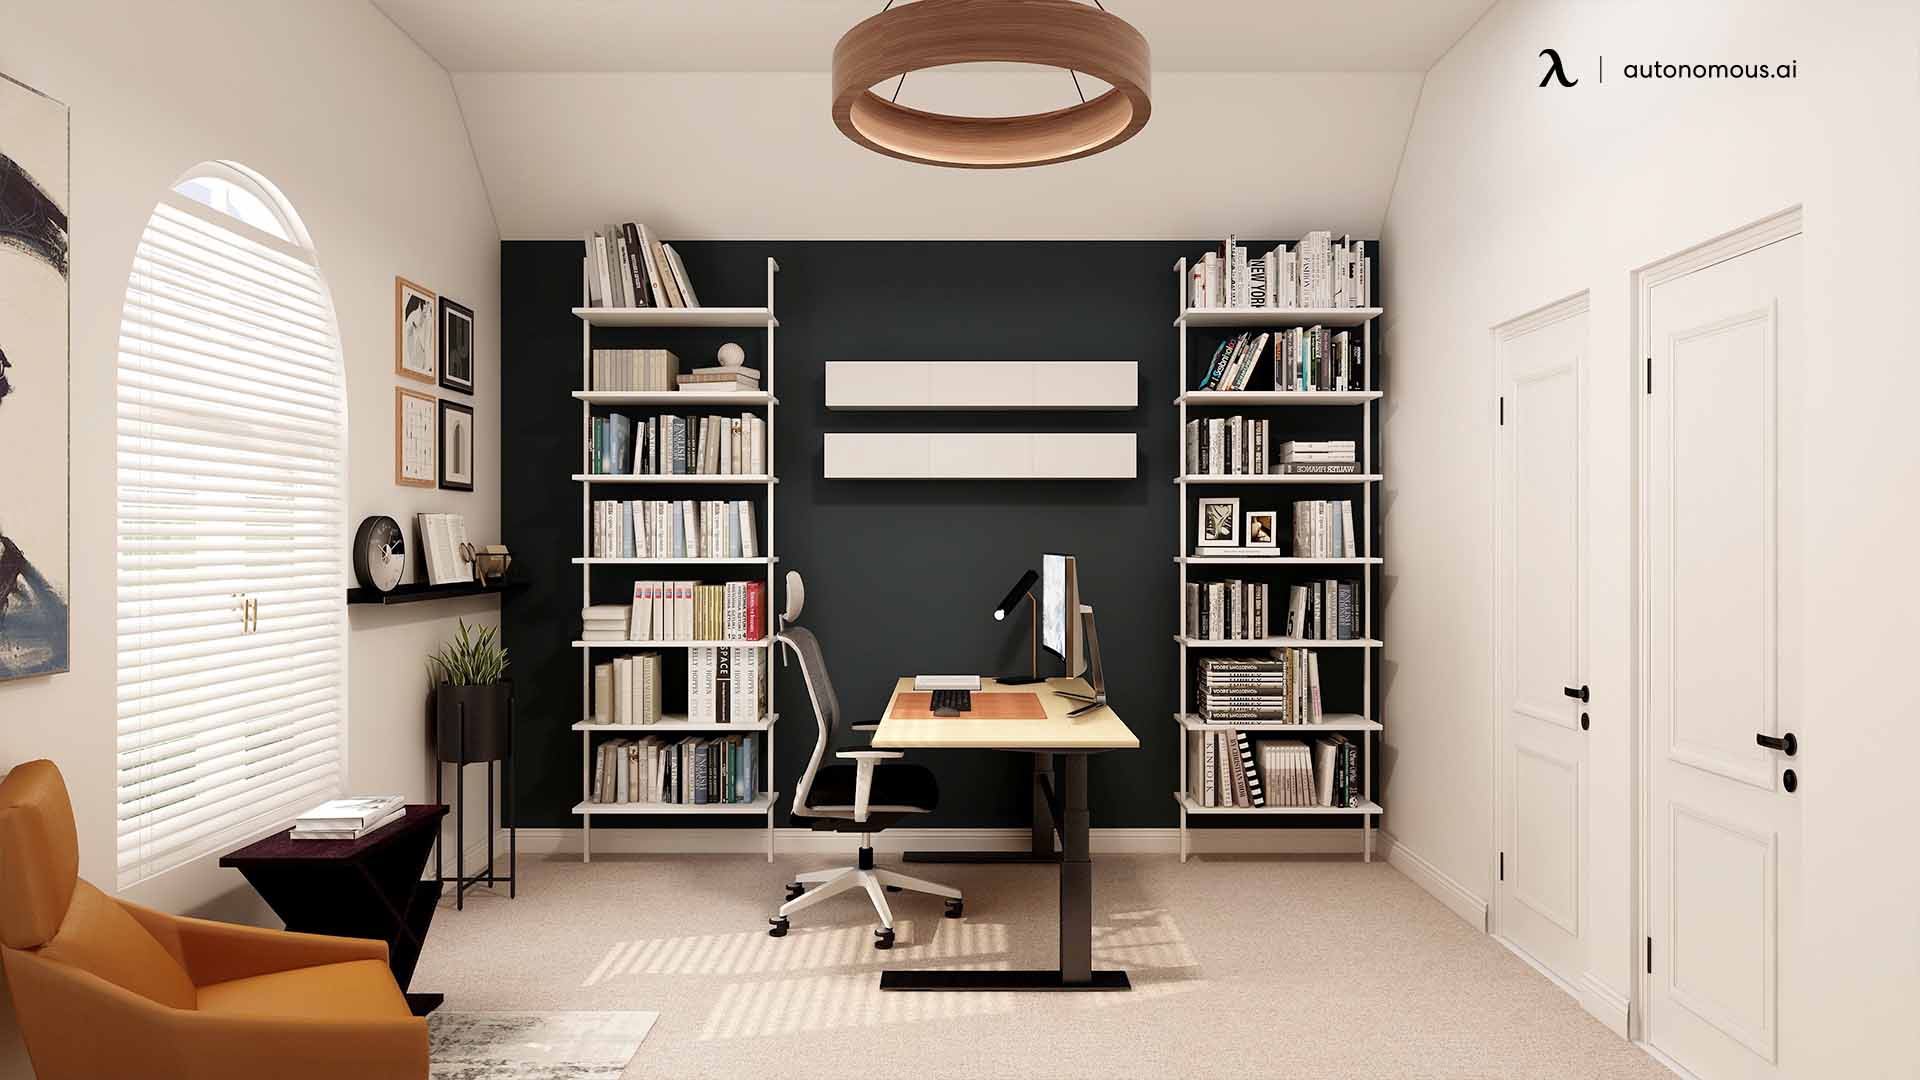 Placing your desk in the middle of the room creates an open and inviting workspace.